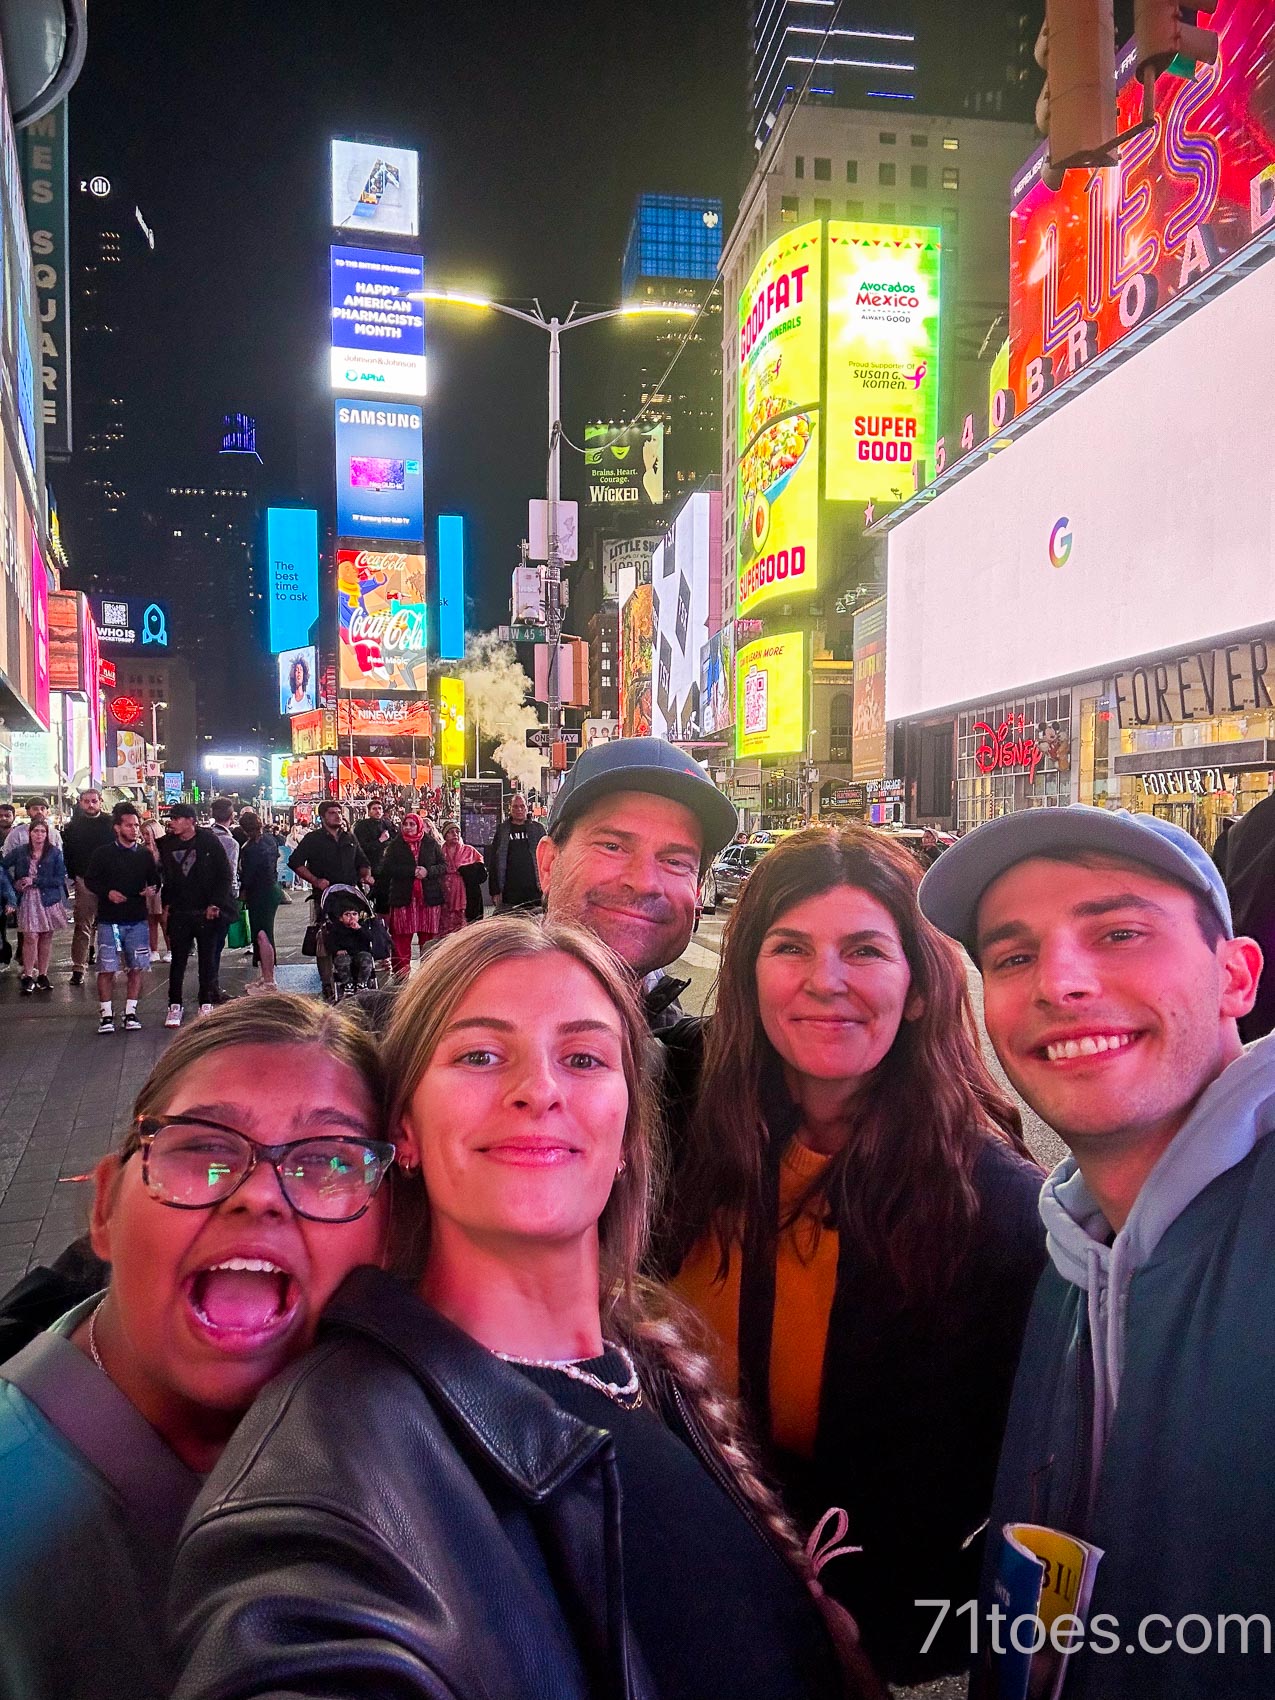 Shawni, David, Carson, Elle and Lucy in Time's Square in NYC